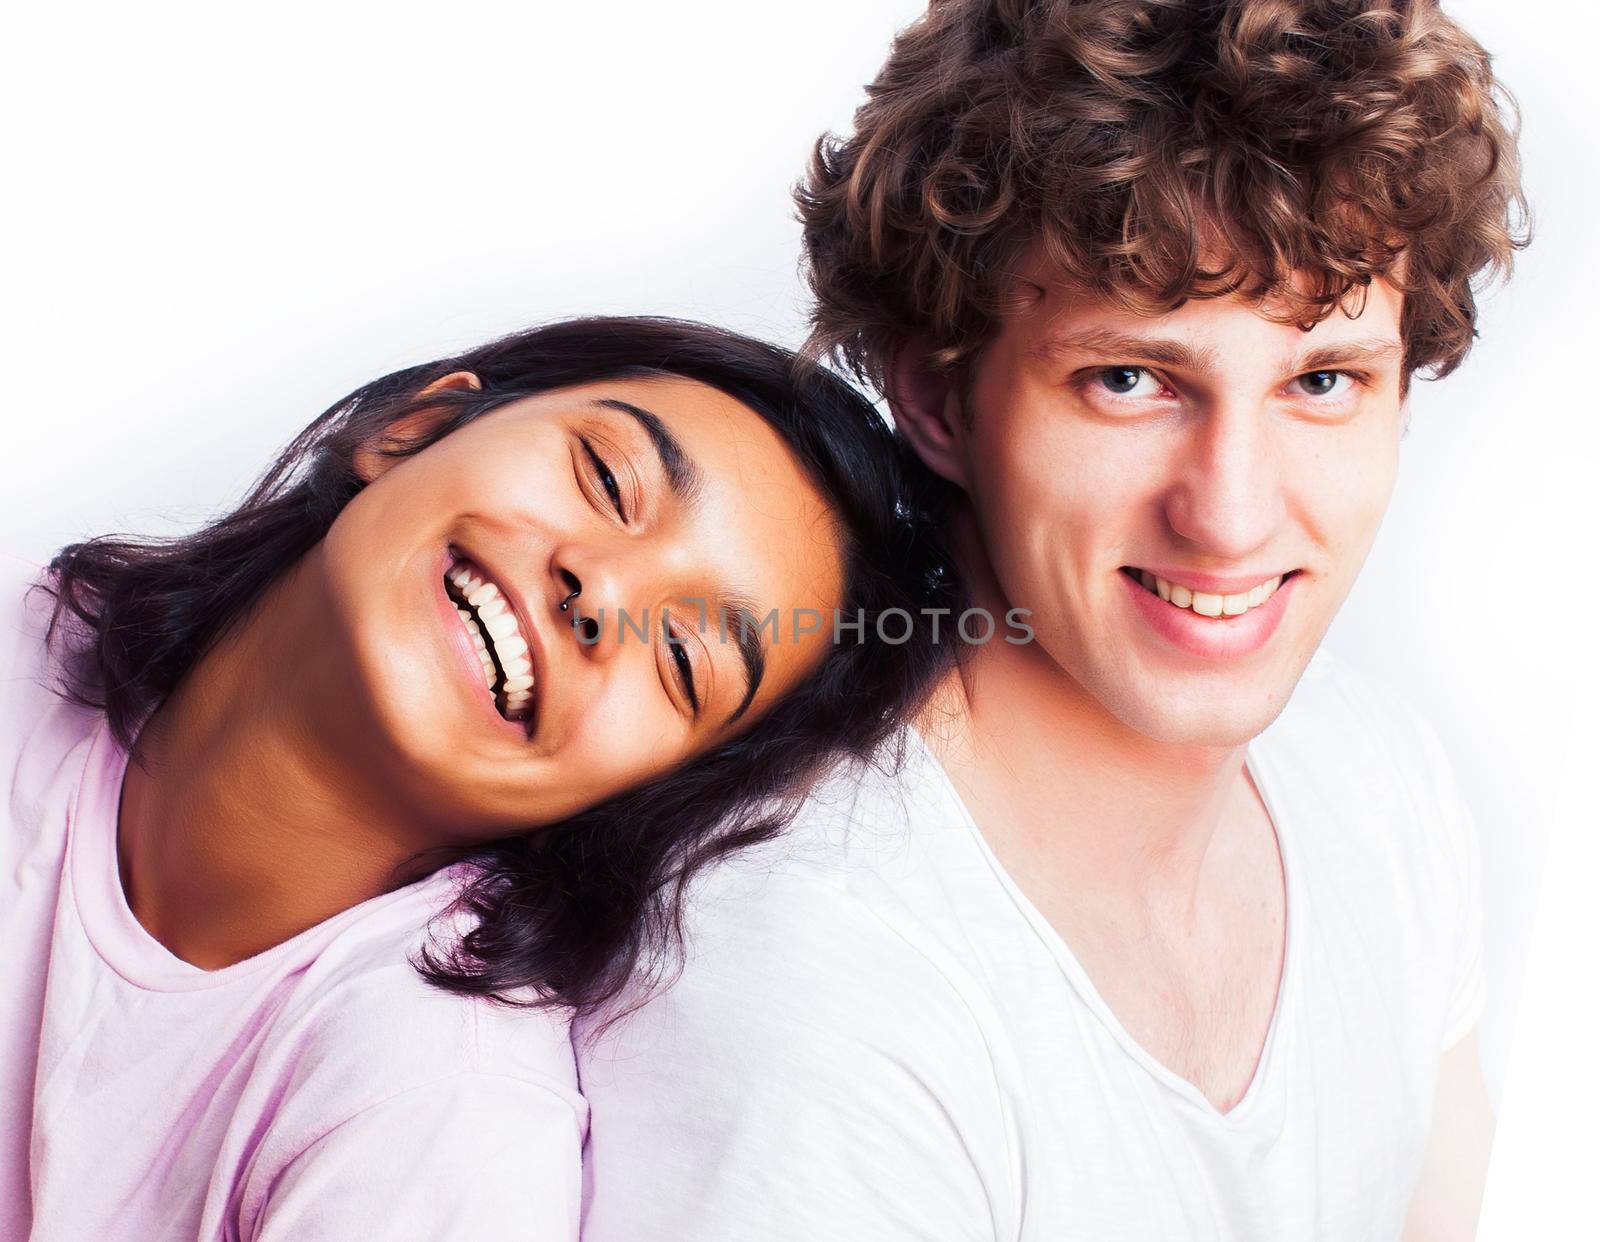 best friends teenage girl and boy together having fun, posing emotional on white background, couple happy smiling, lifestyle people concept, blond and brunette multi nations by JordanJ